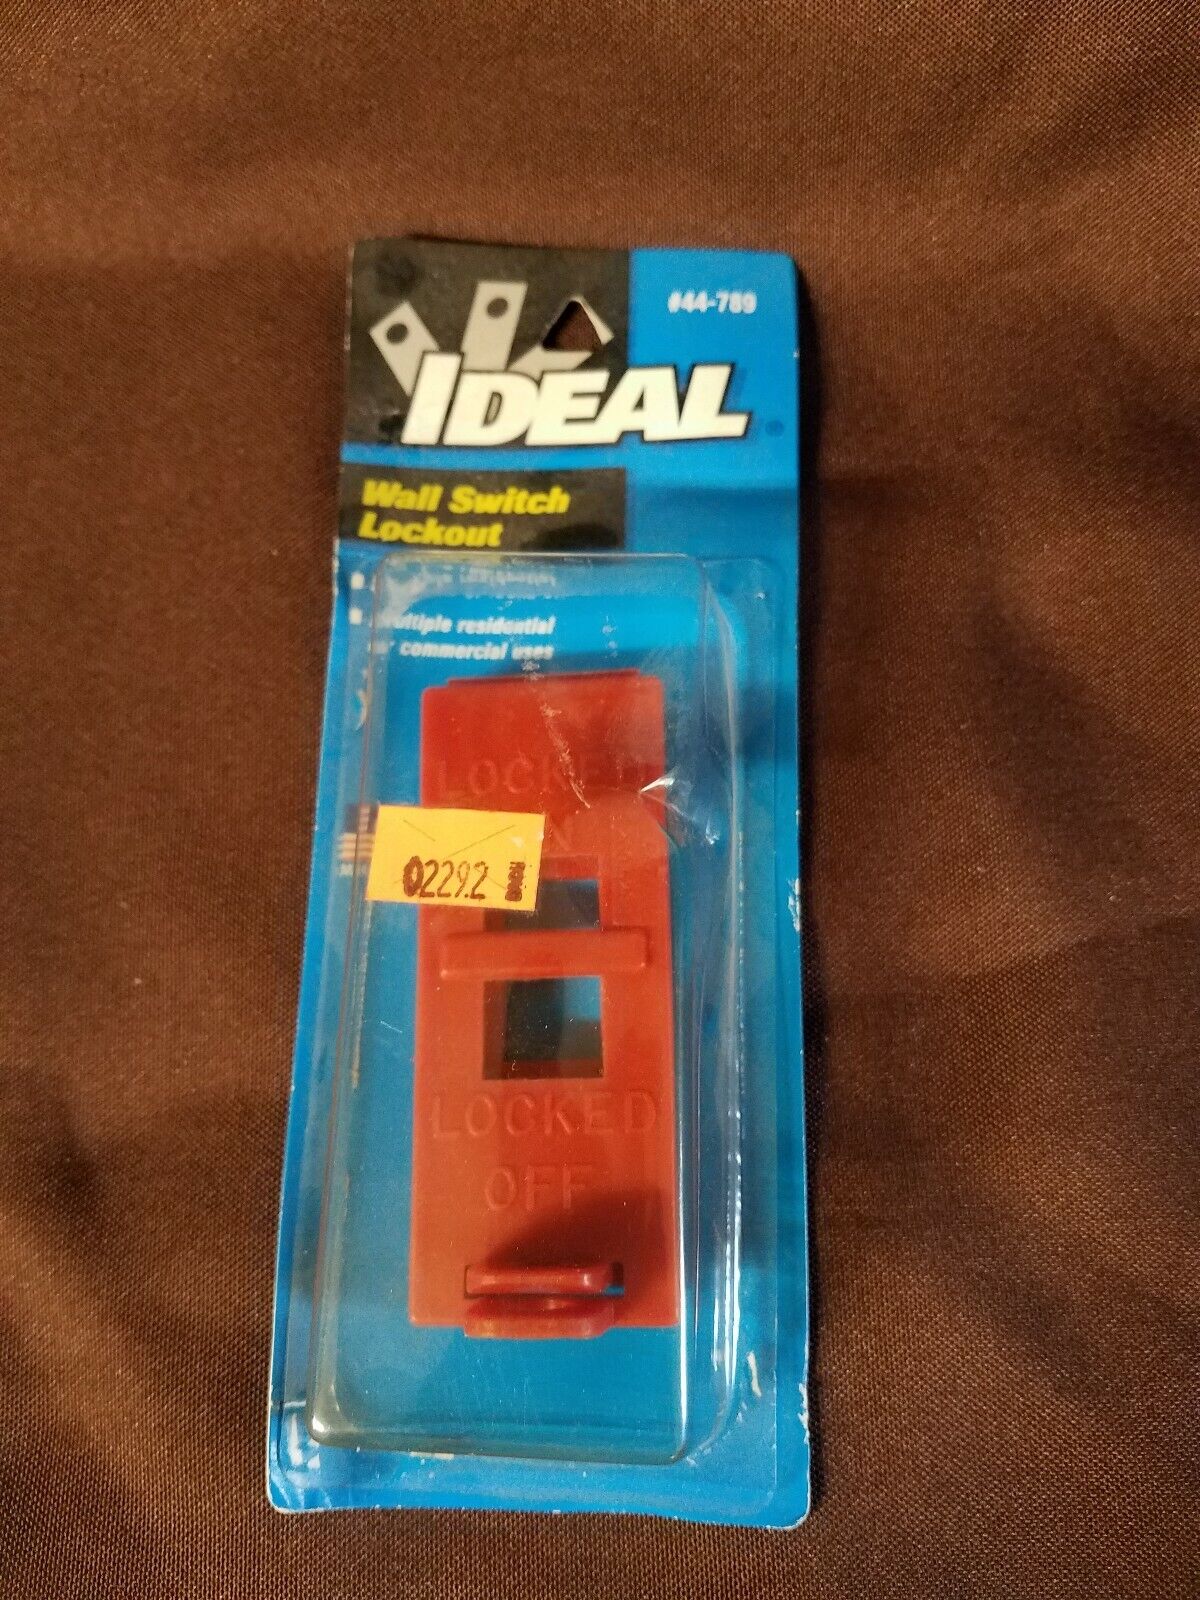 IDEAL 44-789 Wall Switch Lockout 